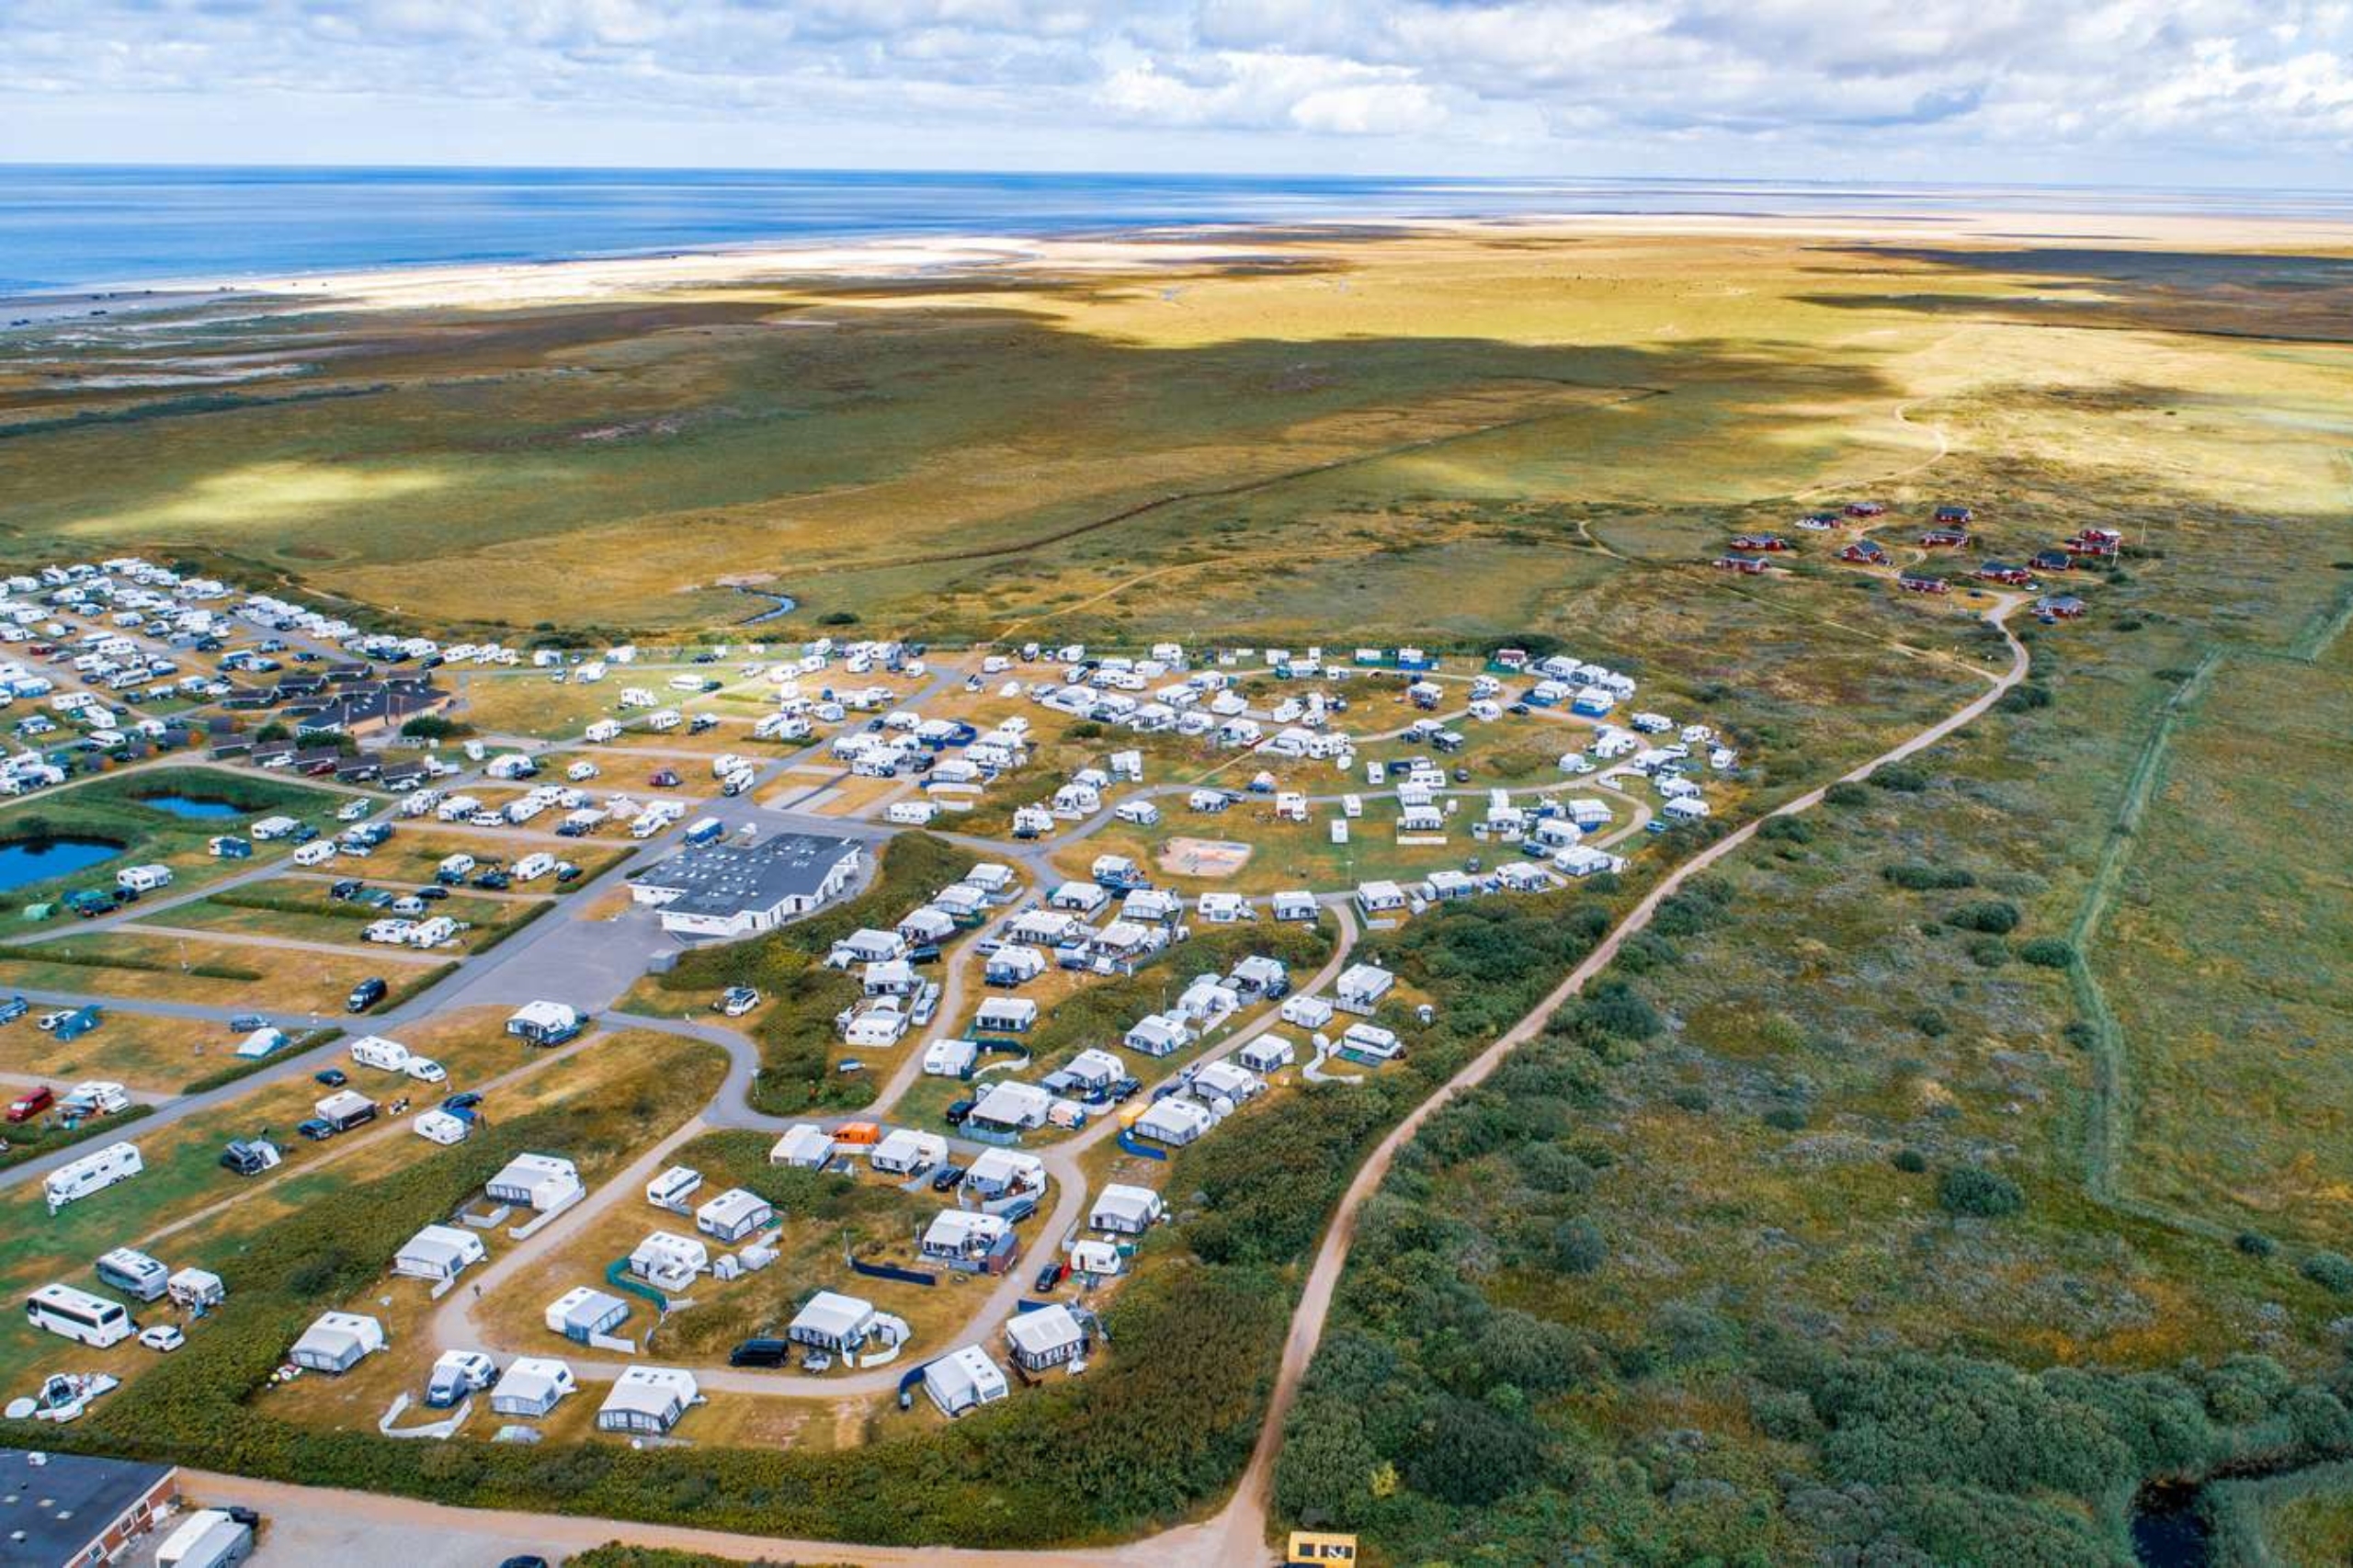 The campsite on Rømø is surrounded by sand dunes, sea, and meadows. 